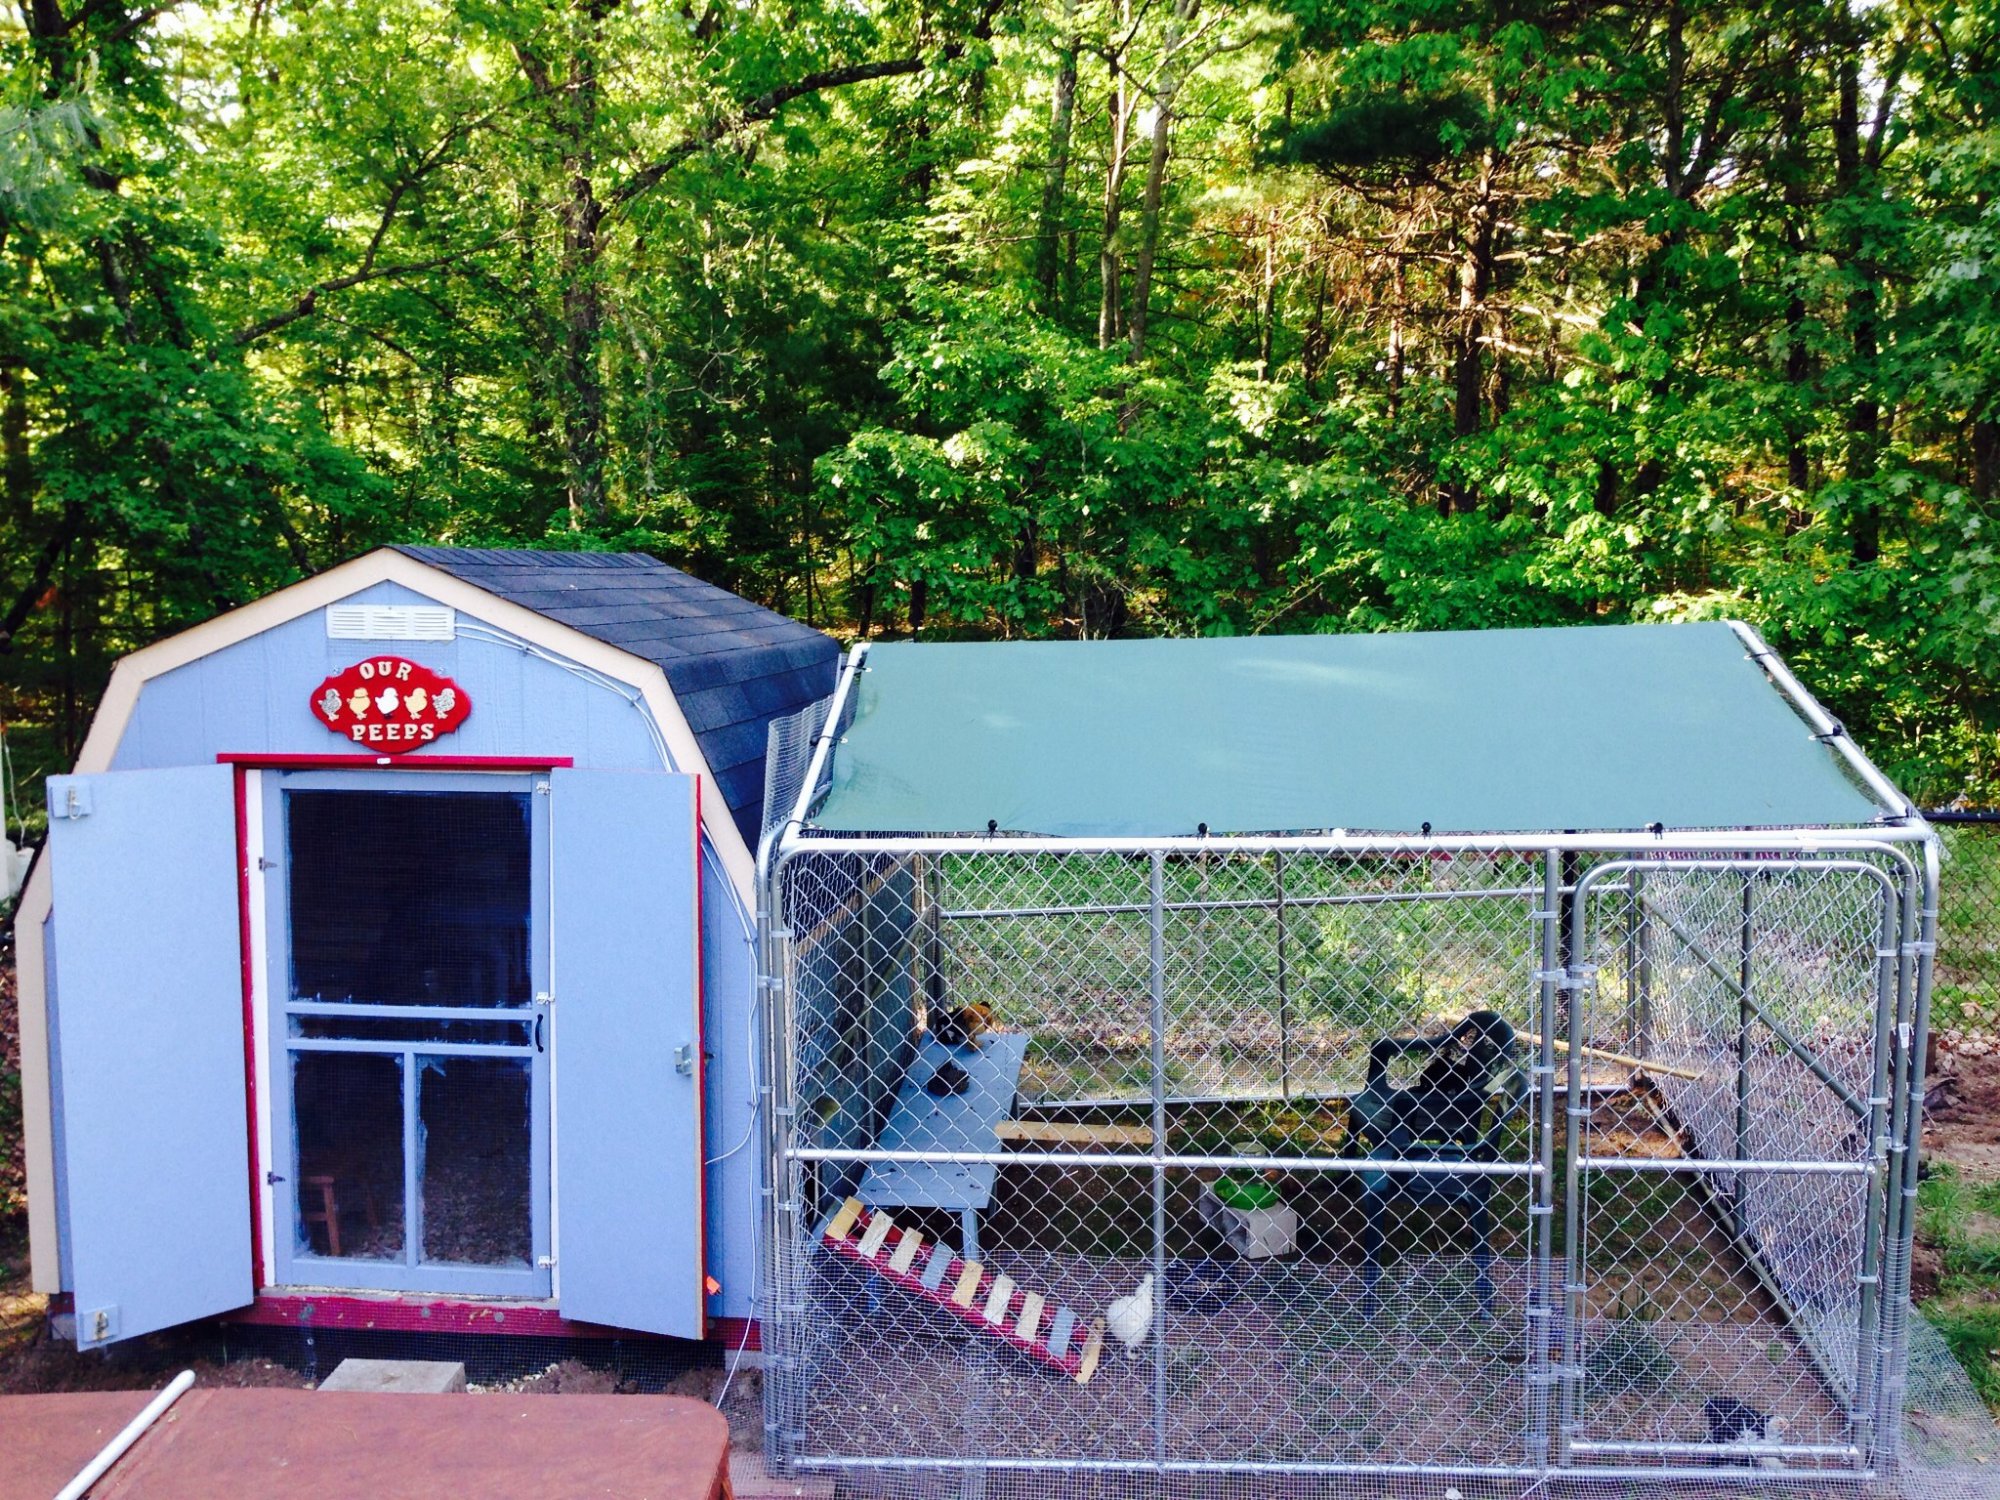 Taj ma coop/fort knox | BackYard Chickens - Learn How to Raise Chickens